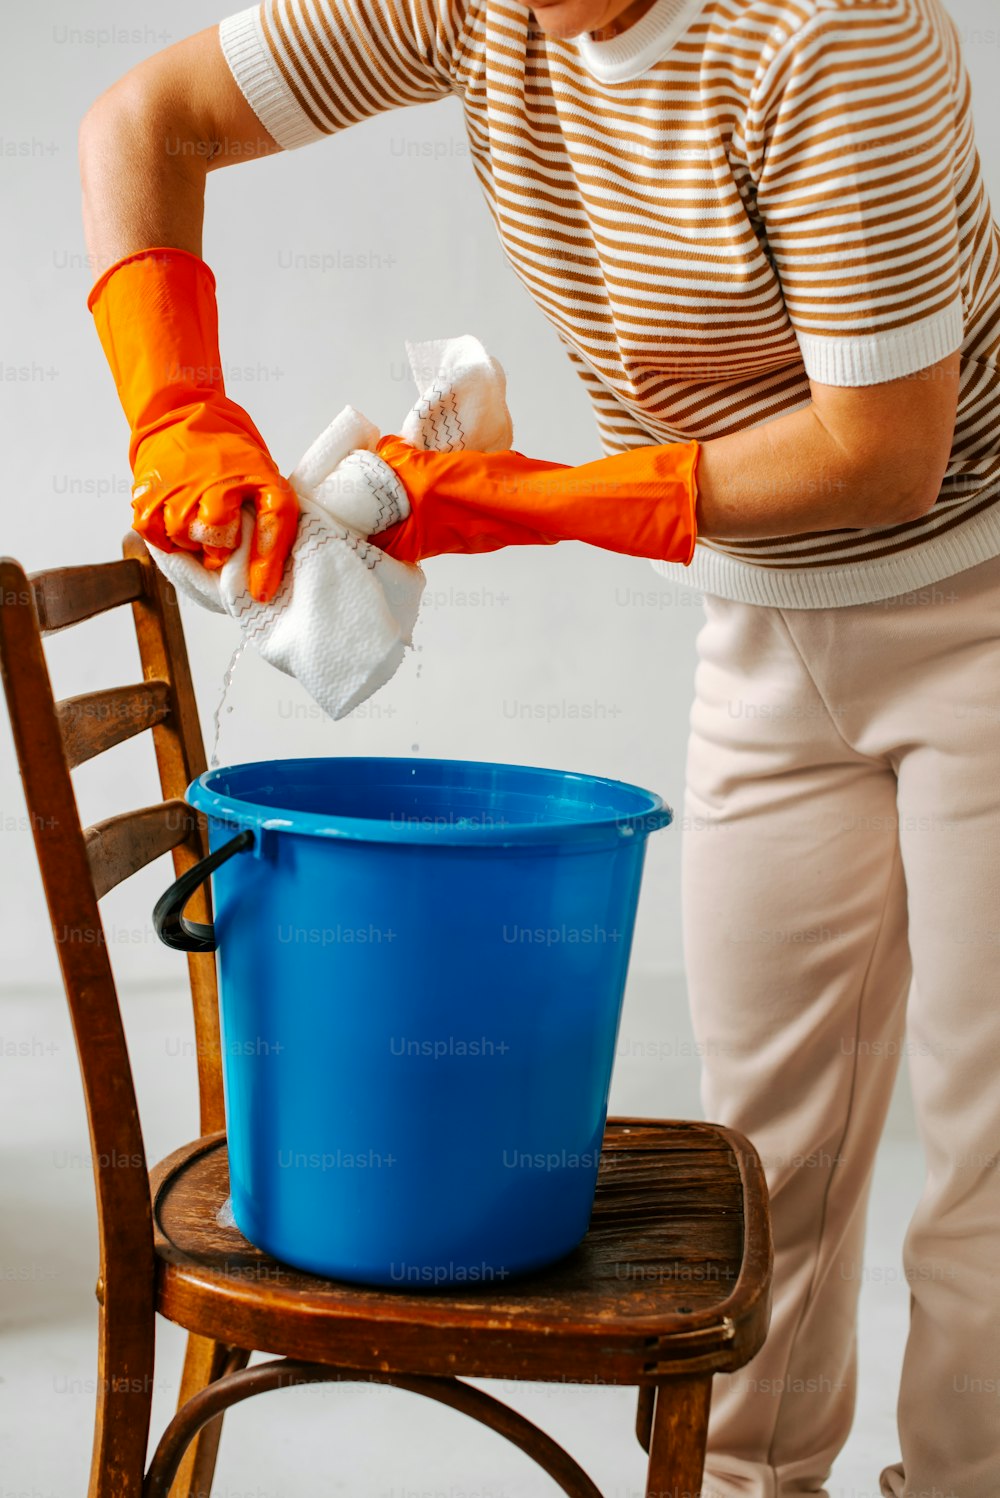 a woman in a striped shirt is cleaning a blue bucket